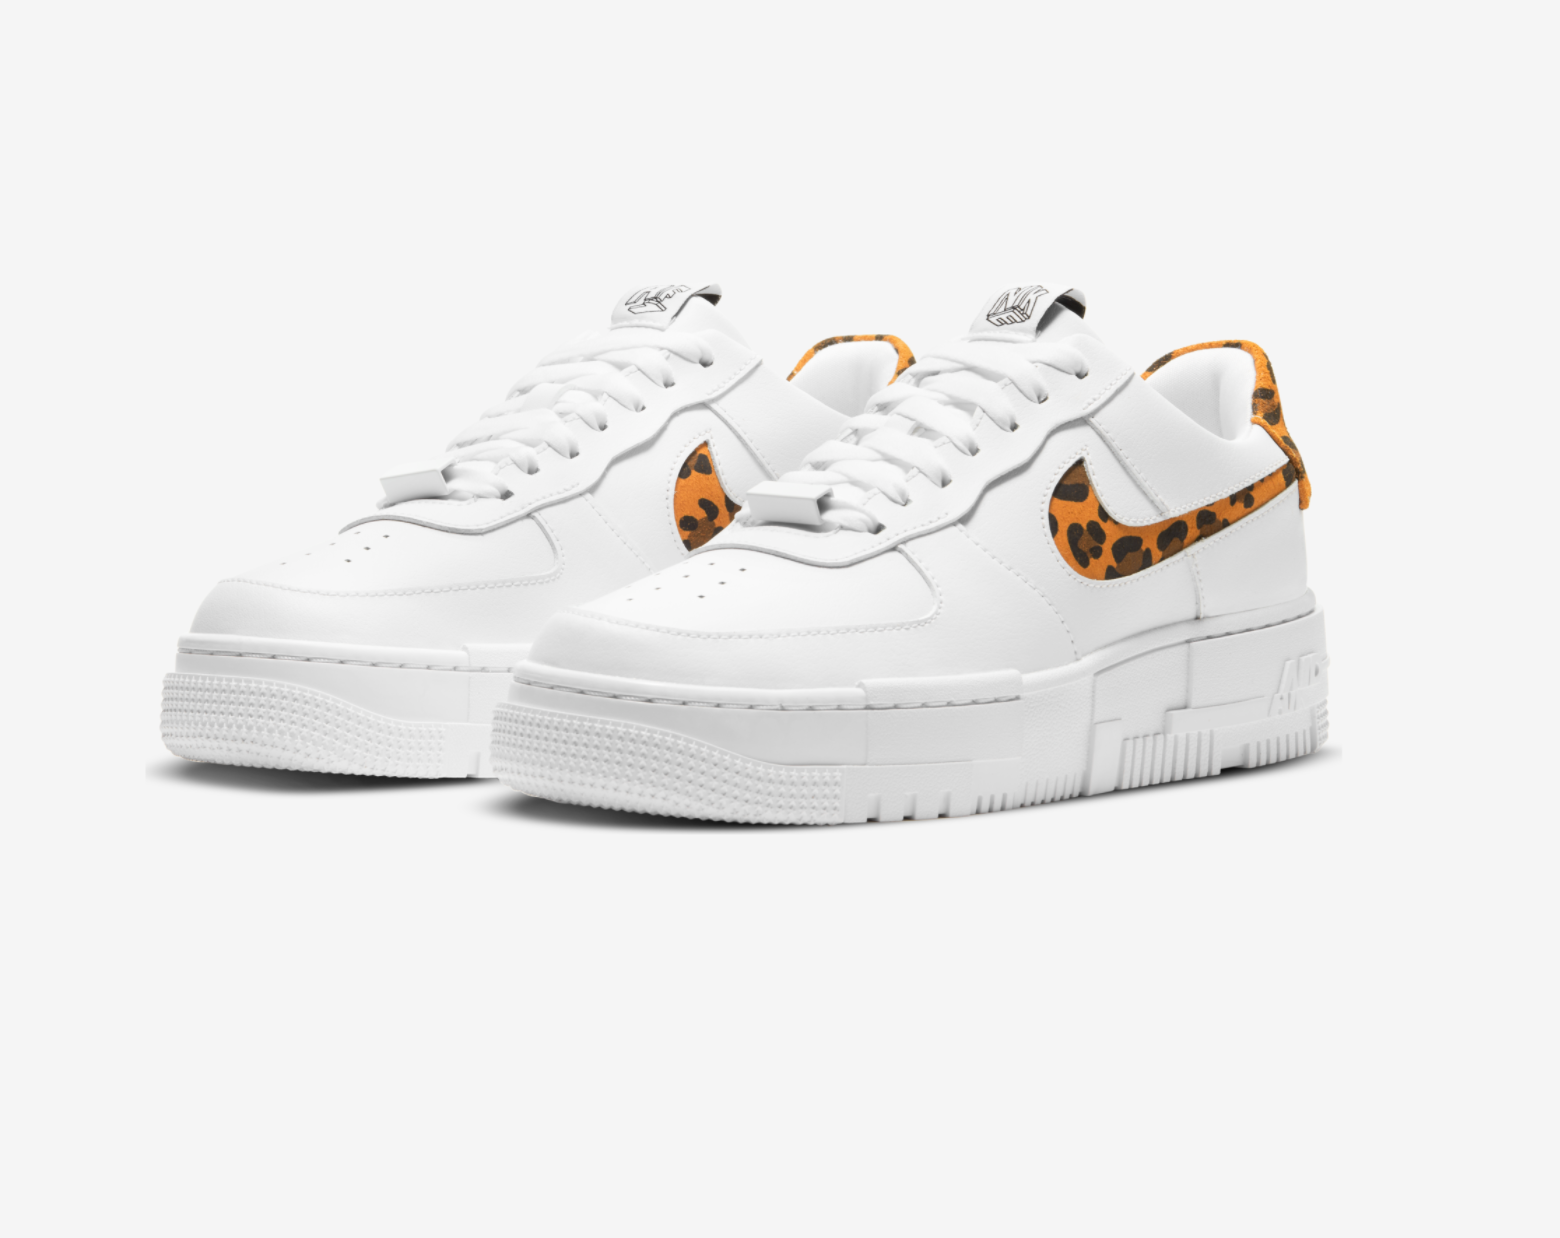 nike air force 1 student discount